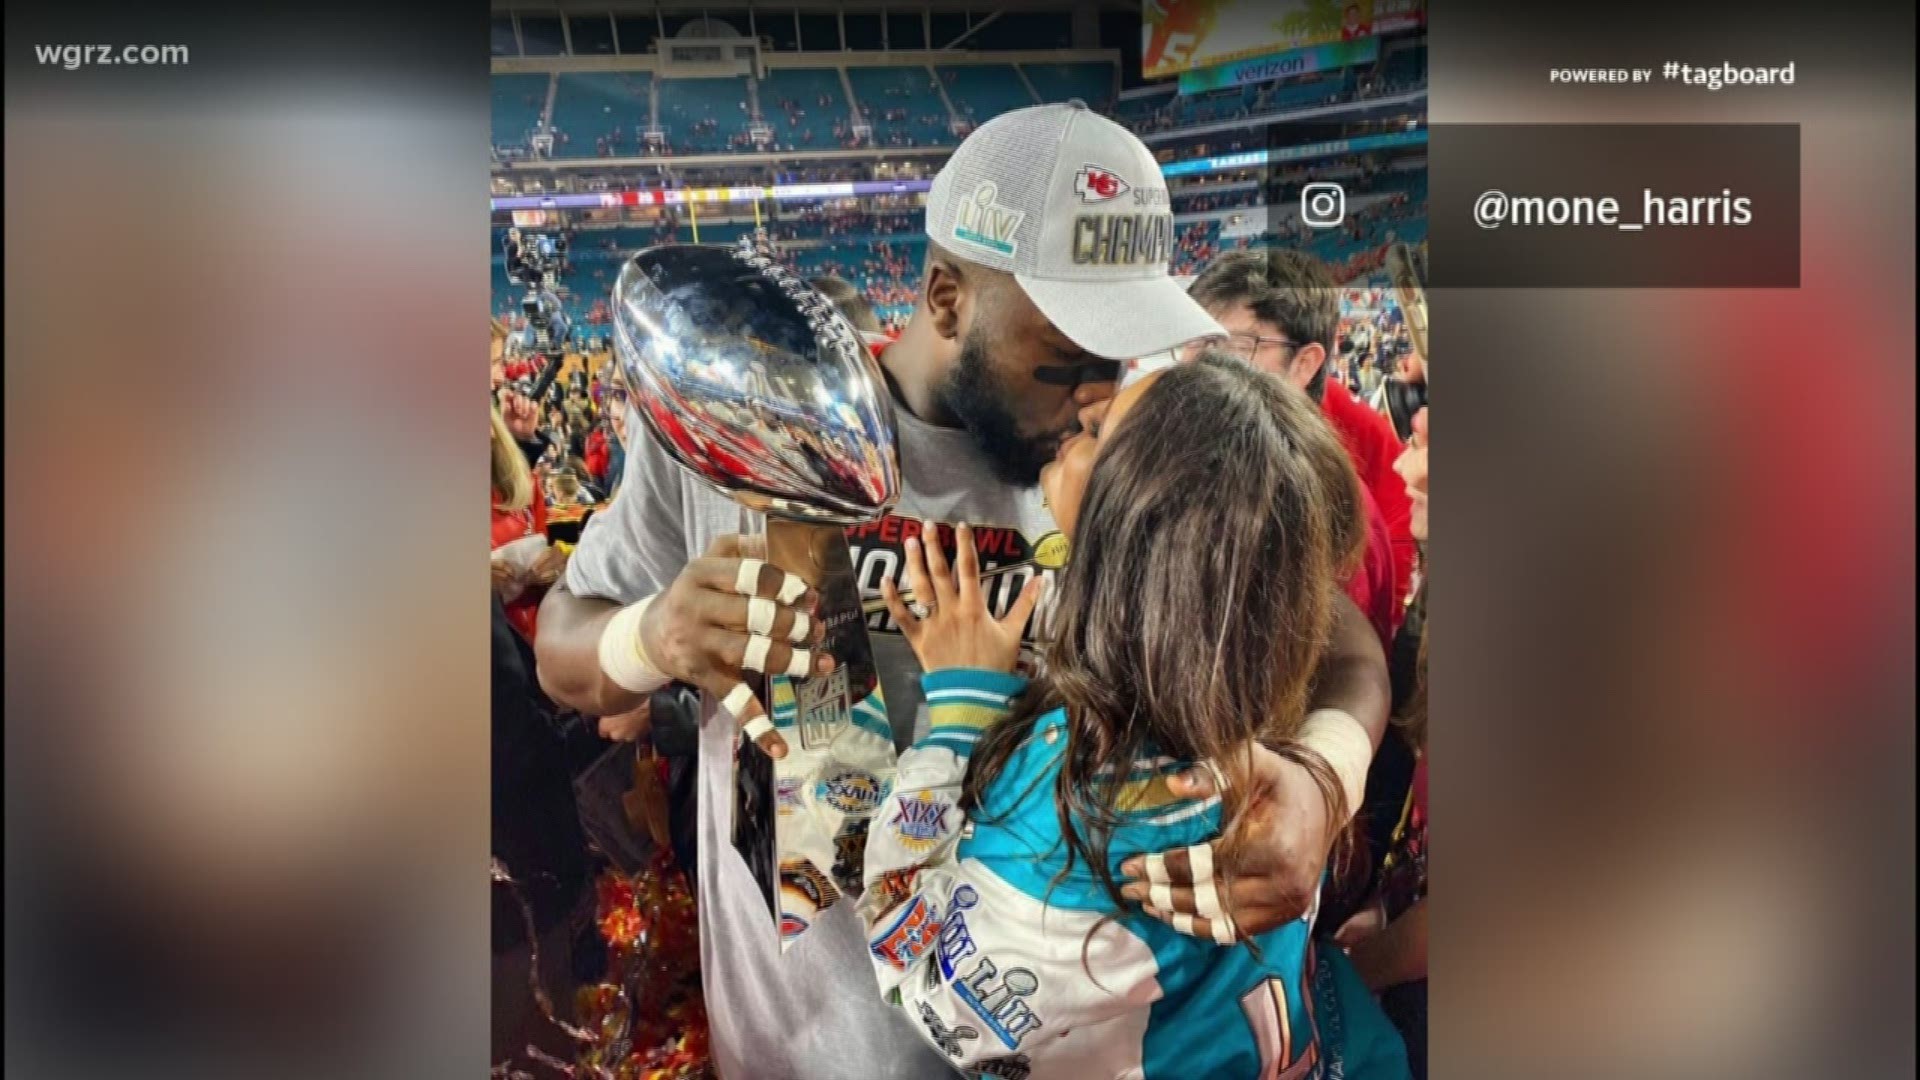 Demone Harris He got his moment afterward there with the Lombardi Trophy... and his fiancee Arianna Marinelli from Williamsville.